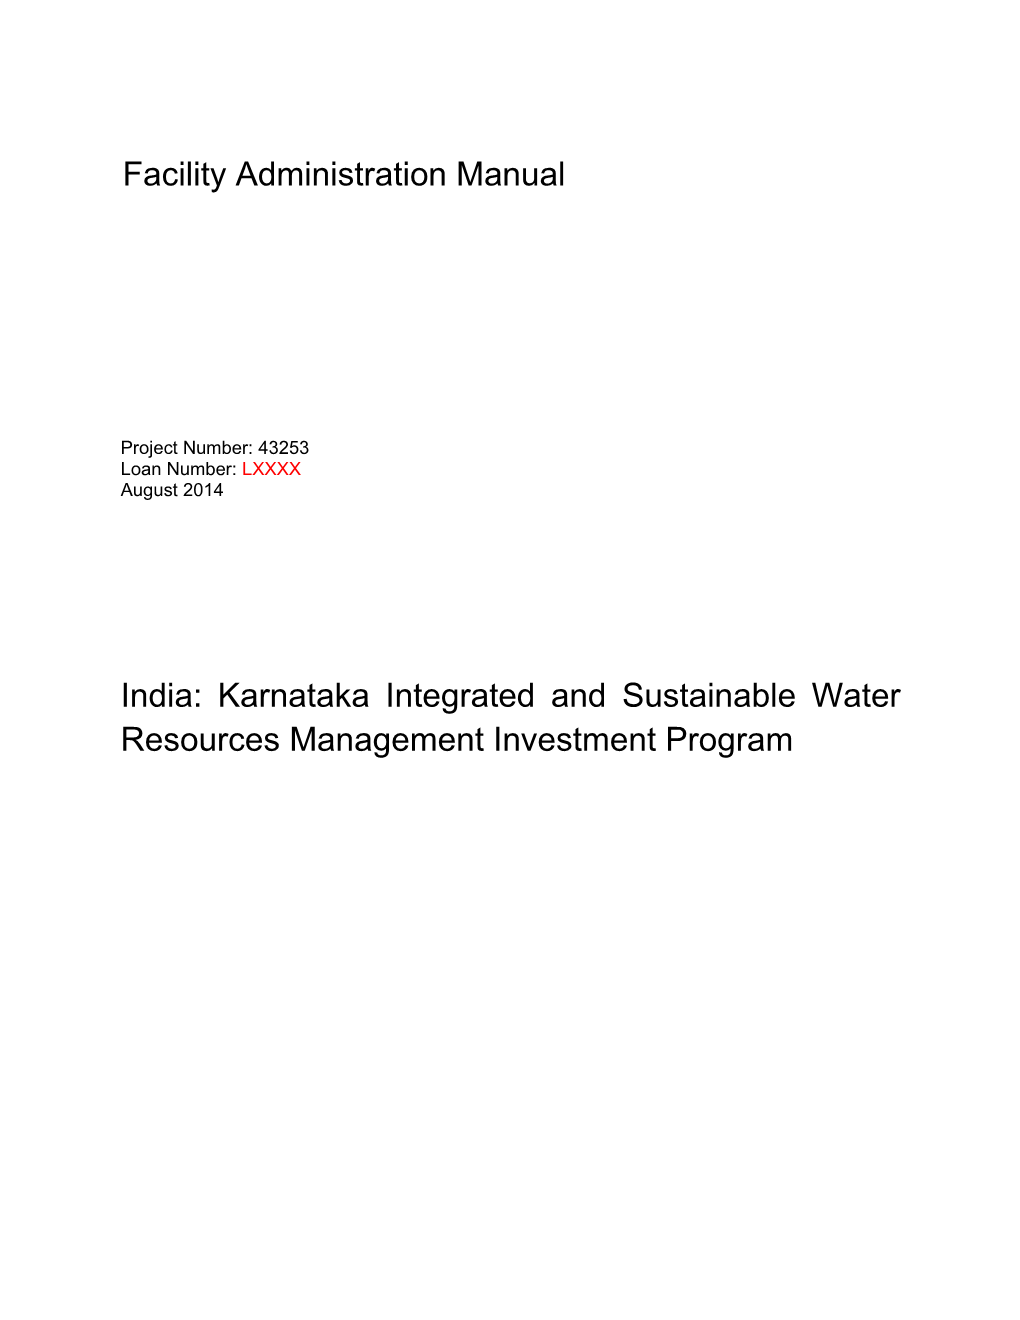 Karnataka Integrated and Sustainable Water Resources Management Investment Program